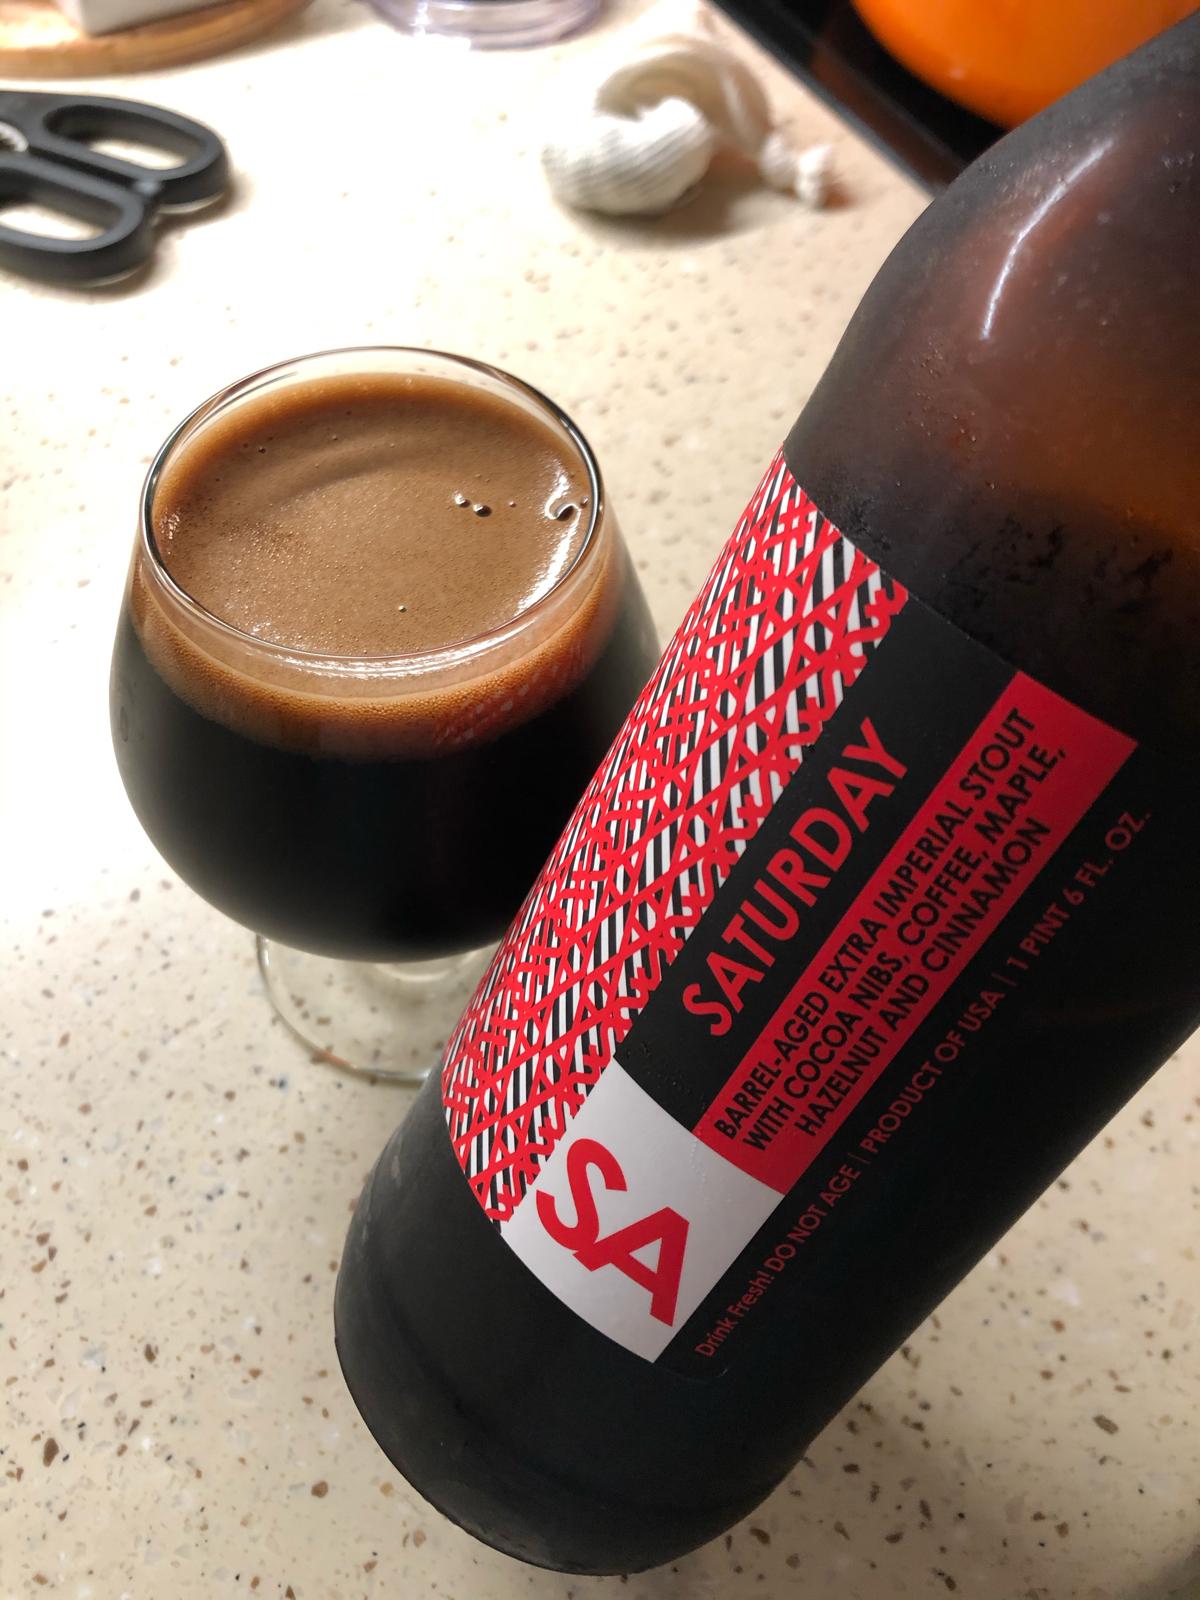 Saturday (2020) - Barrel Aged Extra Imperial Stout with Cocoa Nibs, Coffee, Maple, Hazelnut & Cinnamon